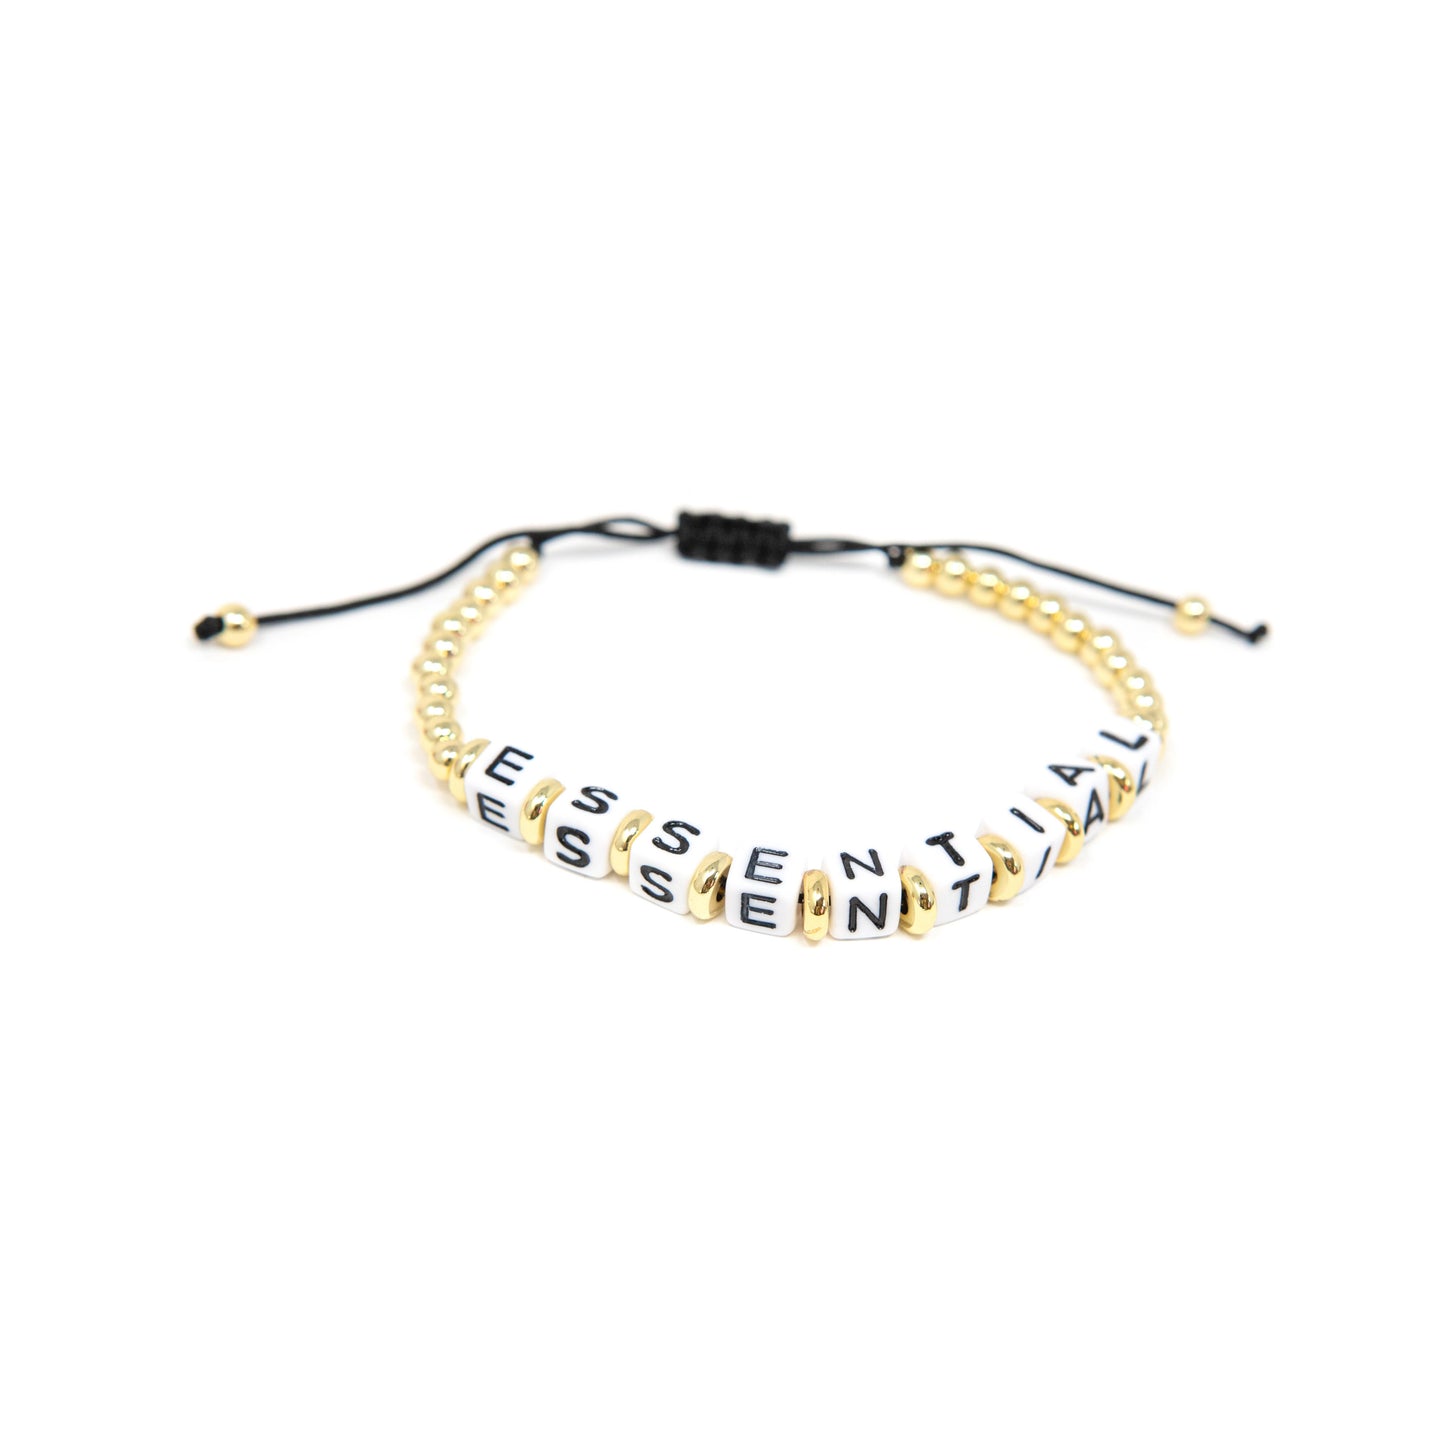 Beaded Adjustable Bracelets JEWELRY The Sis Kiss Essential White Beads with Black Lettering